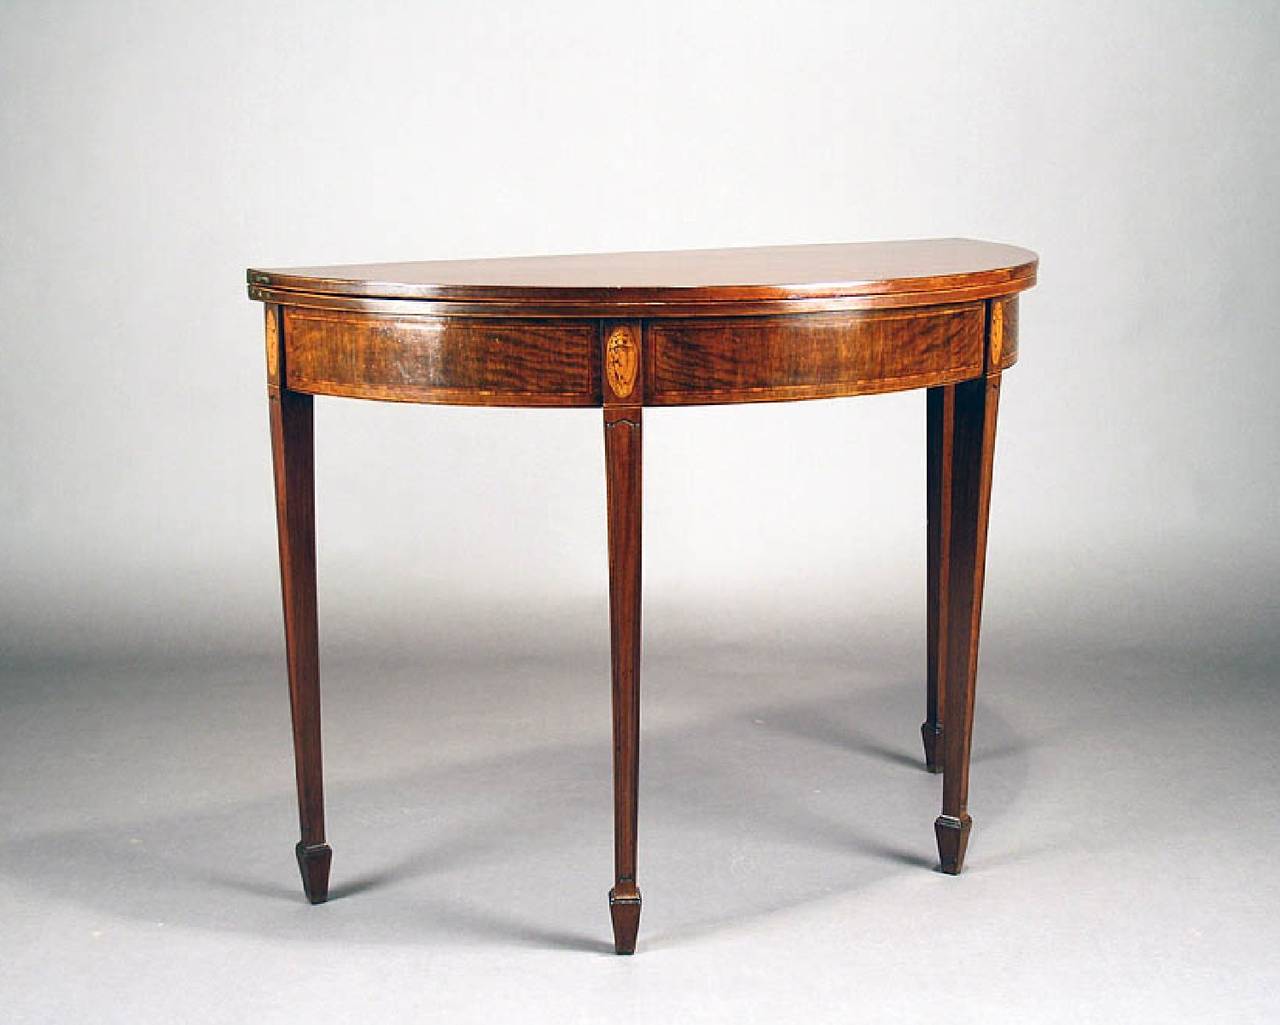 A fine quality George III inlaid mahogany tea / card table on tapering legs. The demilune solid mahogany top opens to an oval supported by the adjustable rear legs below which is a frieze boxwood strung with satinwood banding. Above each finely